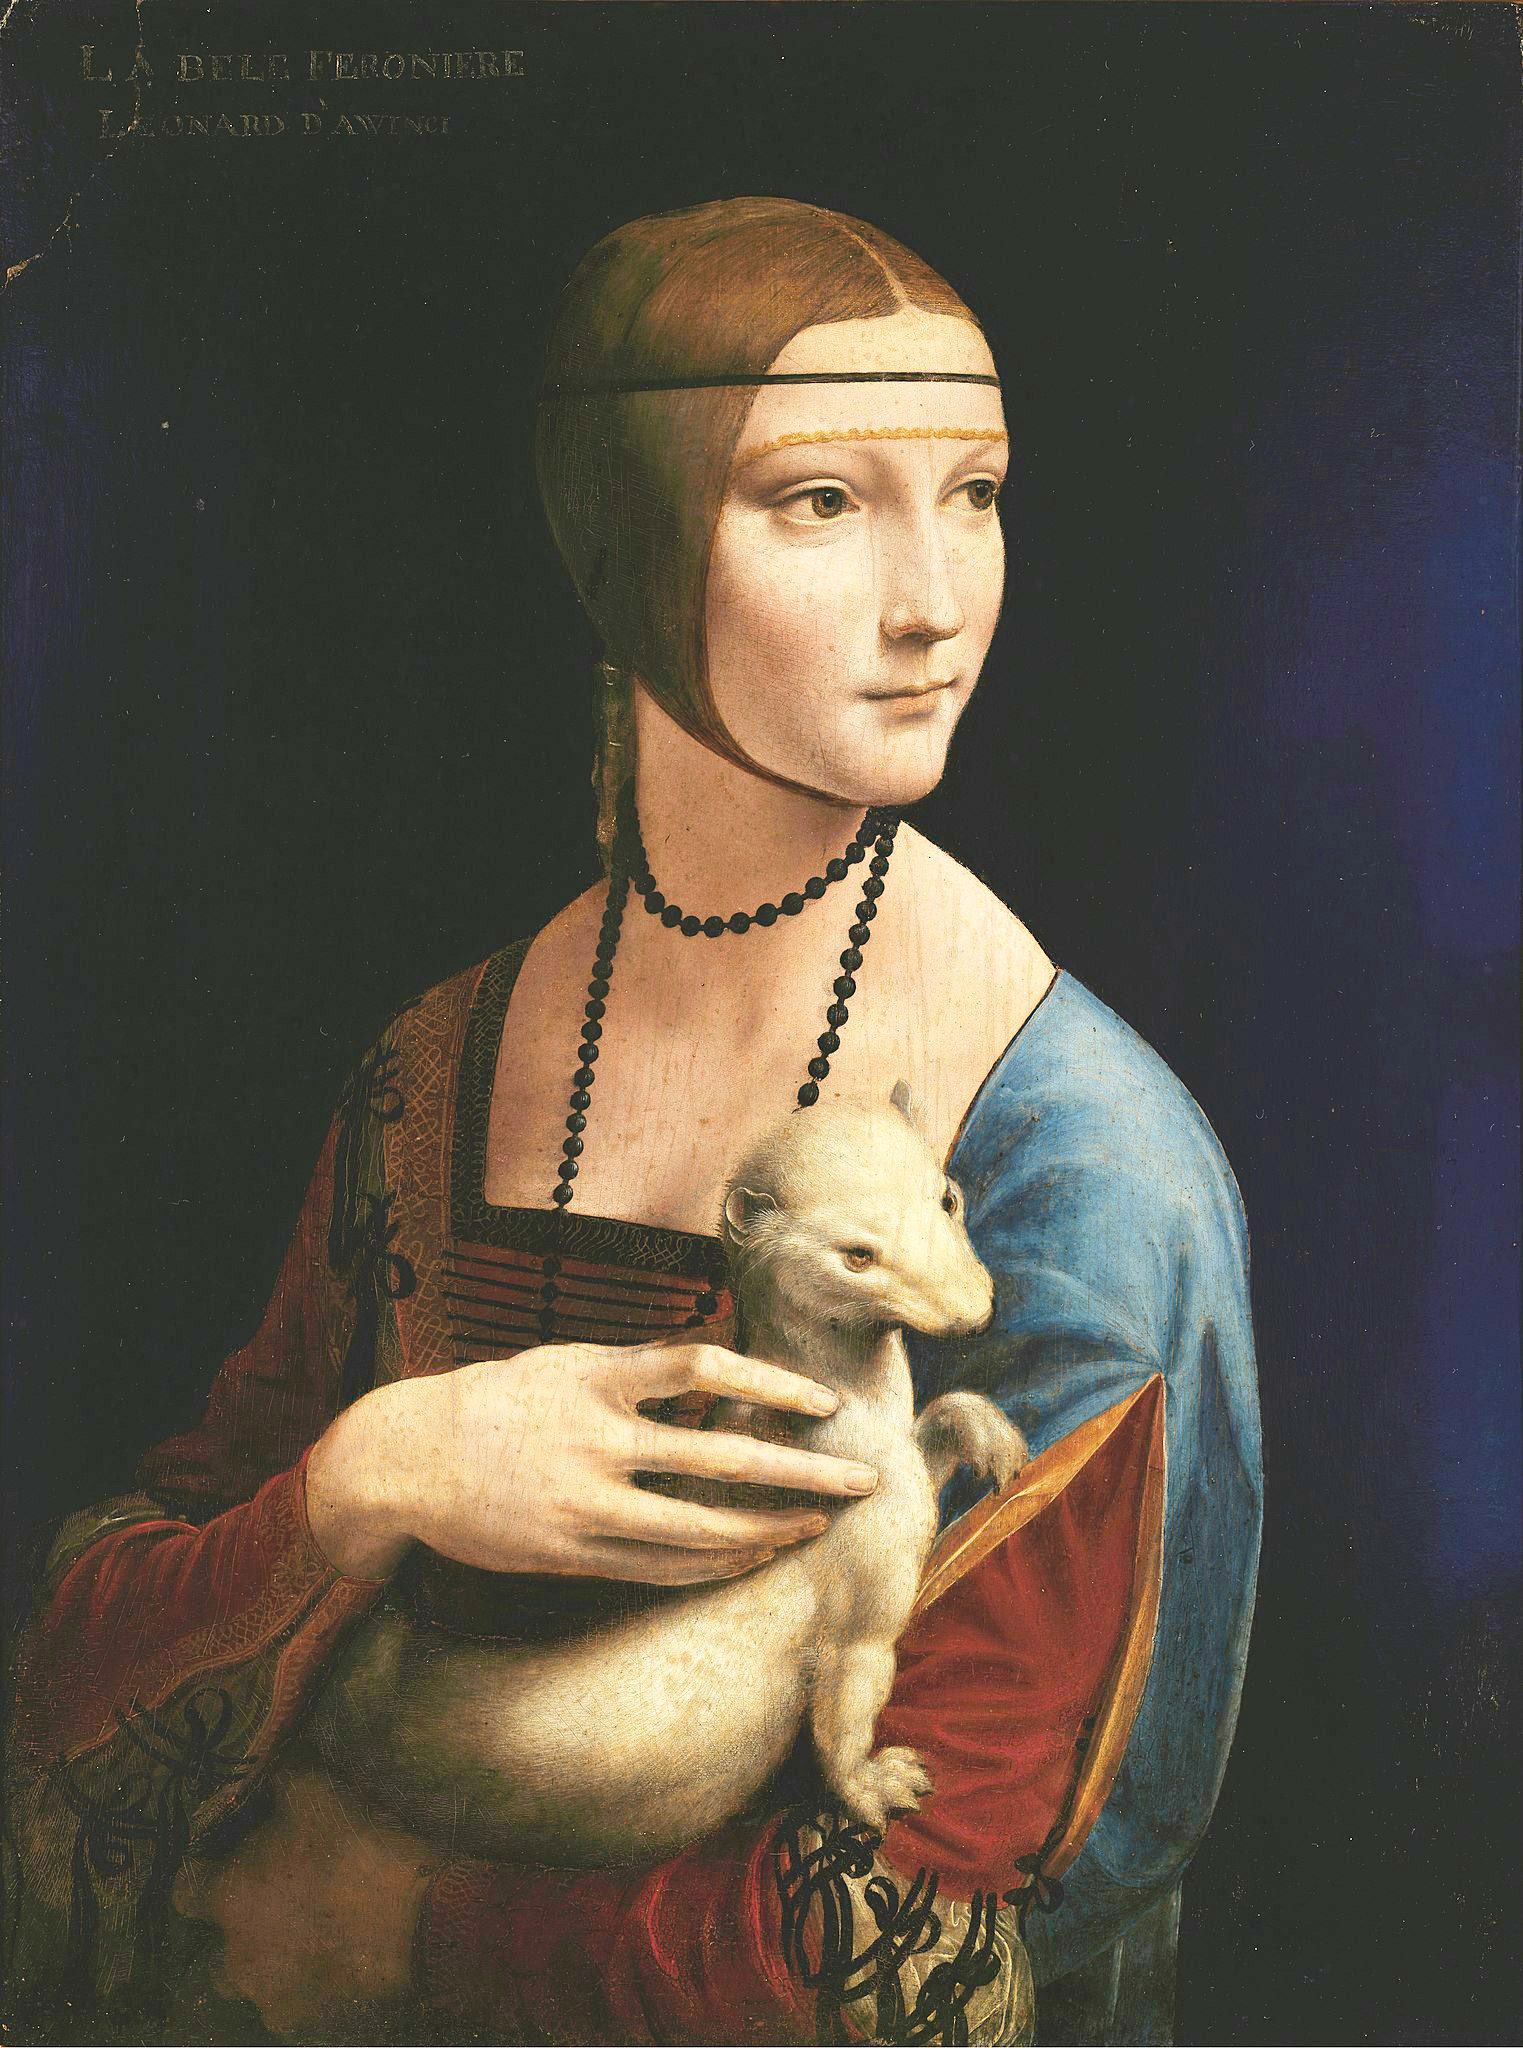 This painting shows a woman holding a small weasel-like animal in her arms. She is wearing a blue dress. Her hair is pulled back into a ponytail and she has a pearl necklace around her neck.The woman is looking to the side with a gentle expression on her face.